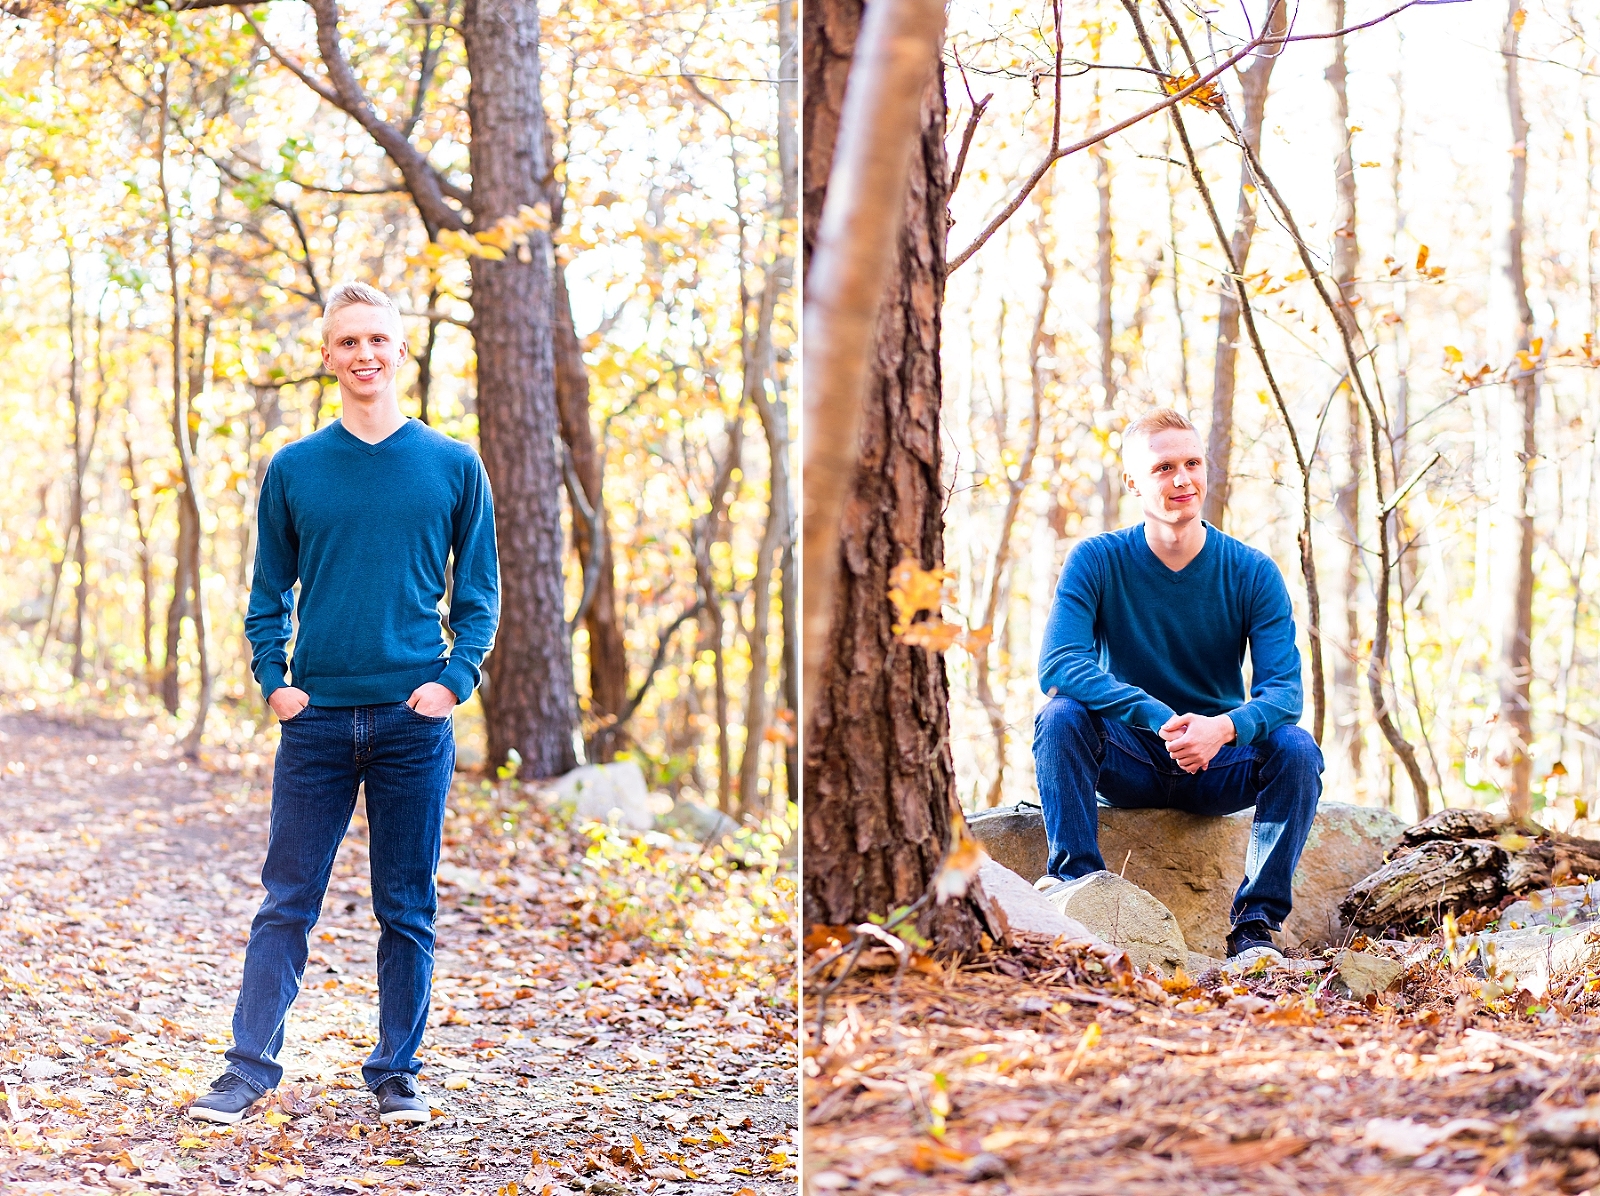 Check out this STUNNING fall senior session at Bears Den Overlook in Bluemont, Virginia! During the PEAK WEEK of fall foliage in Virginia. Senior, senior photos, natural, senior pics, fall photos, peak fall colors, Virginia senior. Photographed by Bethanie Vetter Photography LLC #SeniorPhotos #FallSenior #FallSeniorPhotos #SeniorPics #Senior2020